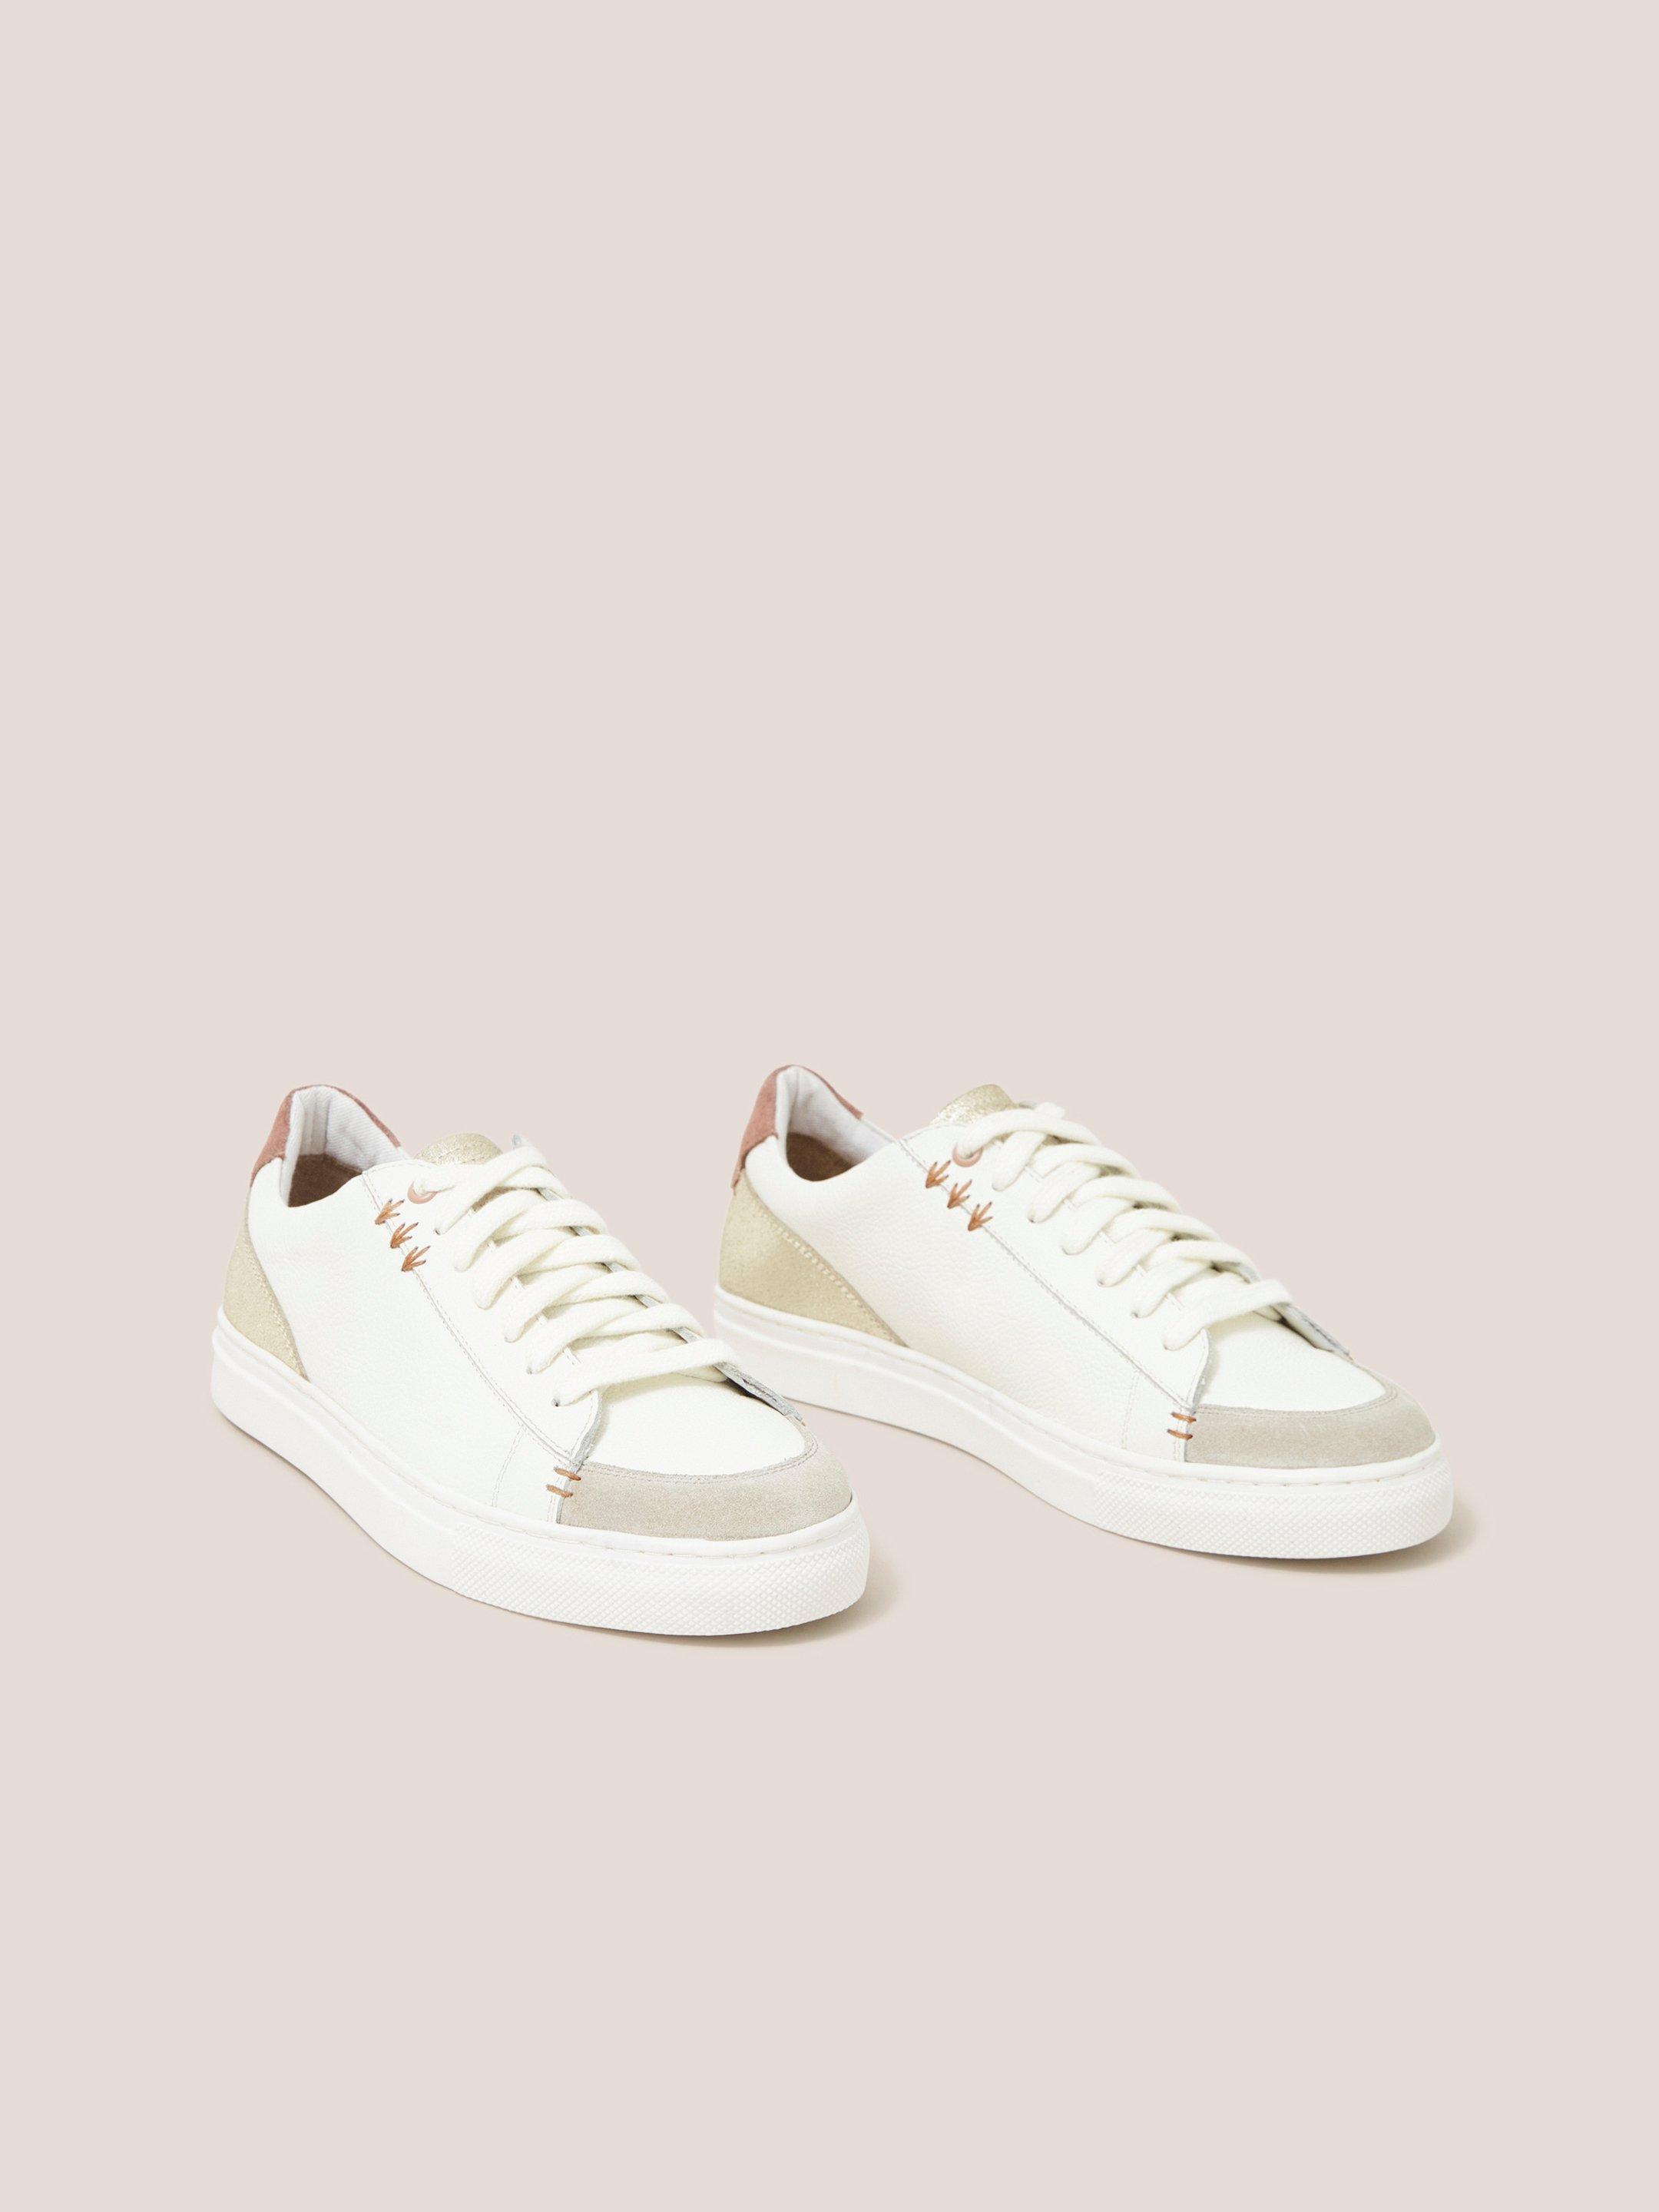 Toni Trainer in WHITE MLT - FLAT FRONT